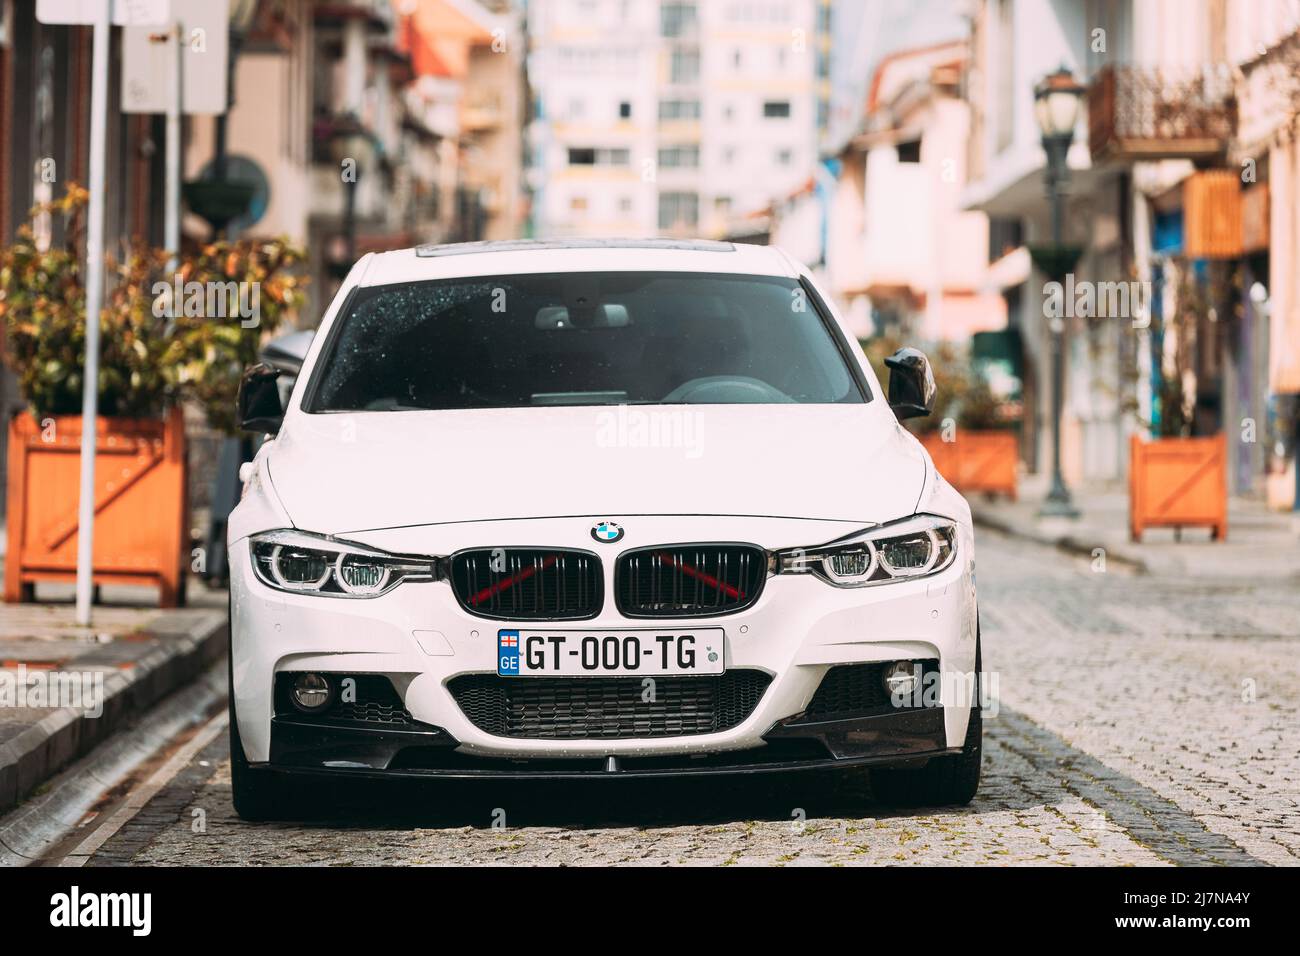 Bmw F30 Photos, Download The BEST Free Bmw F30 Stock Photos & HD Images